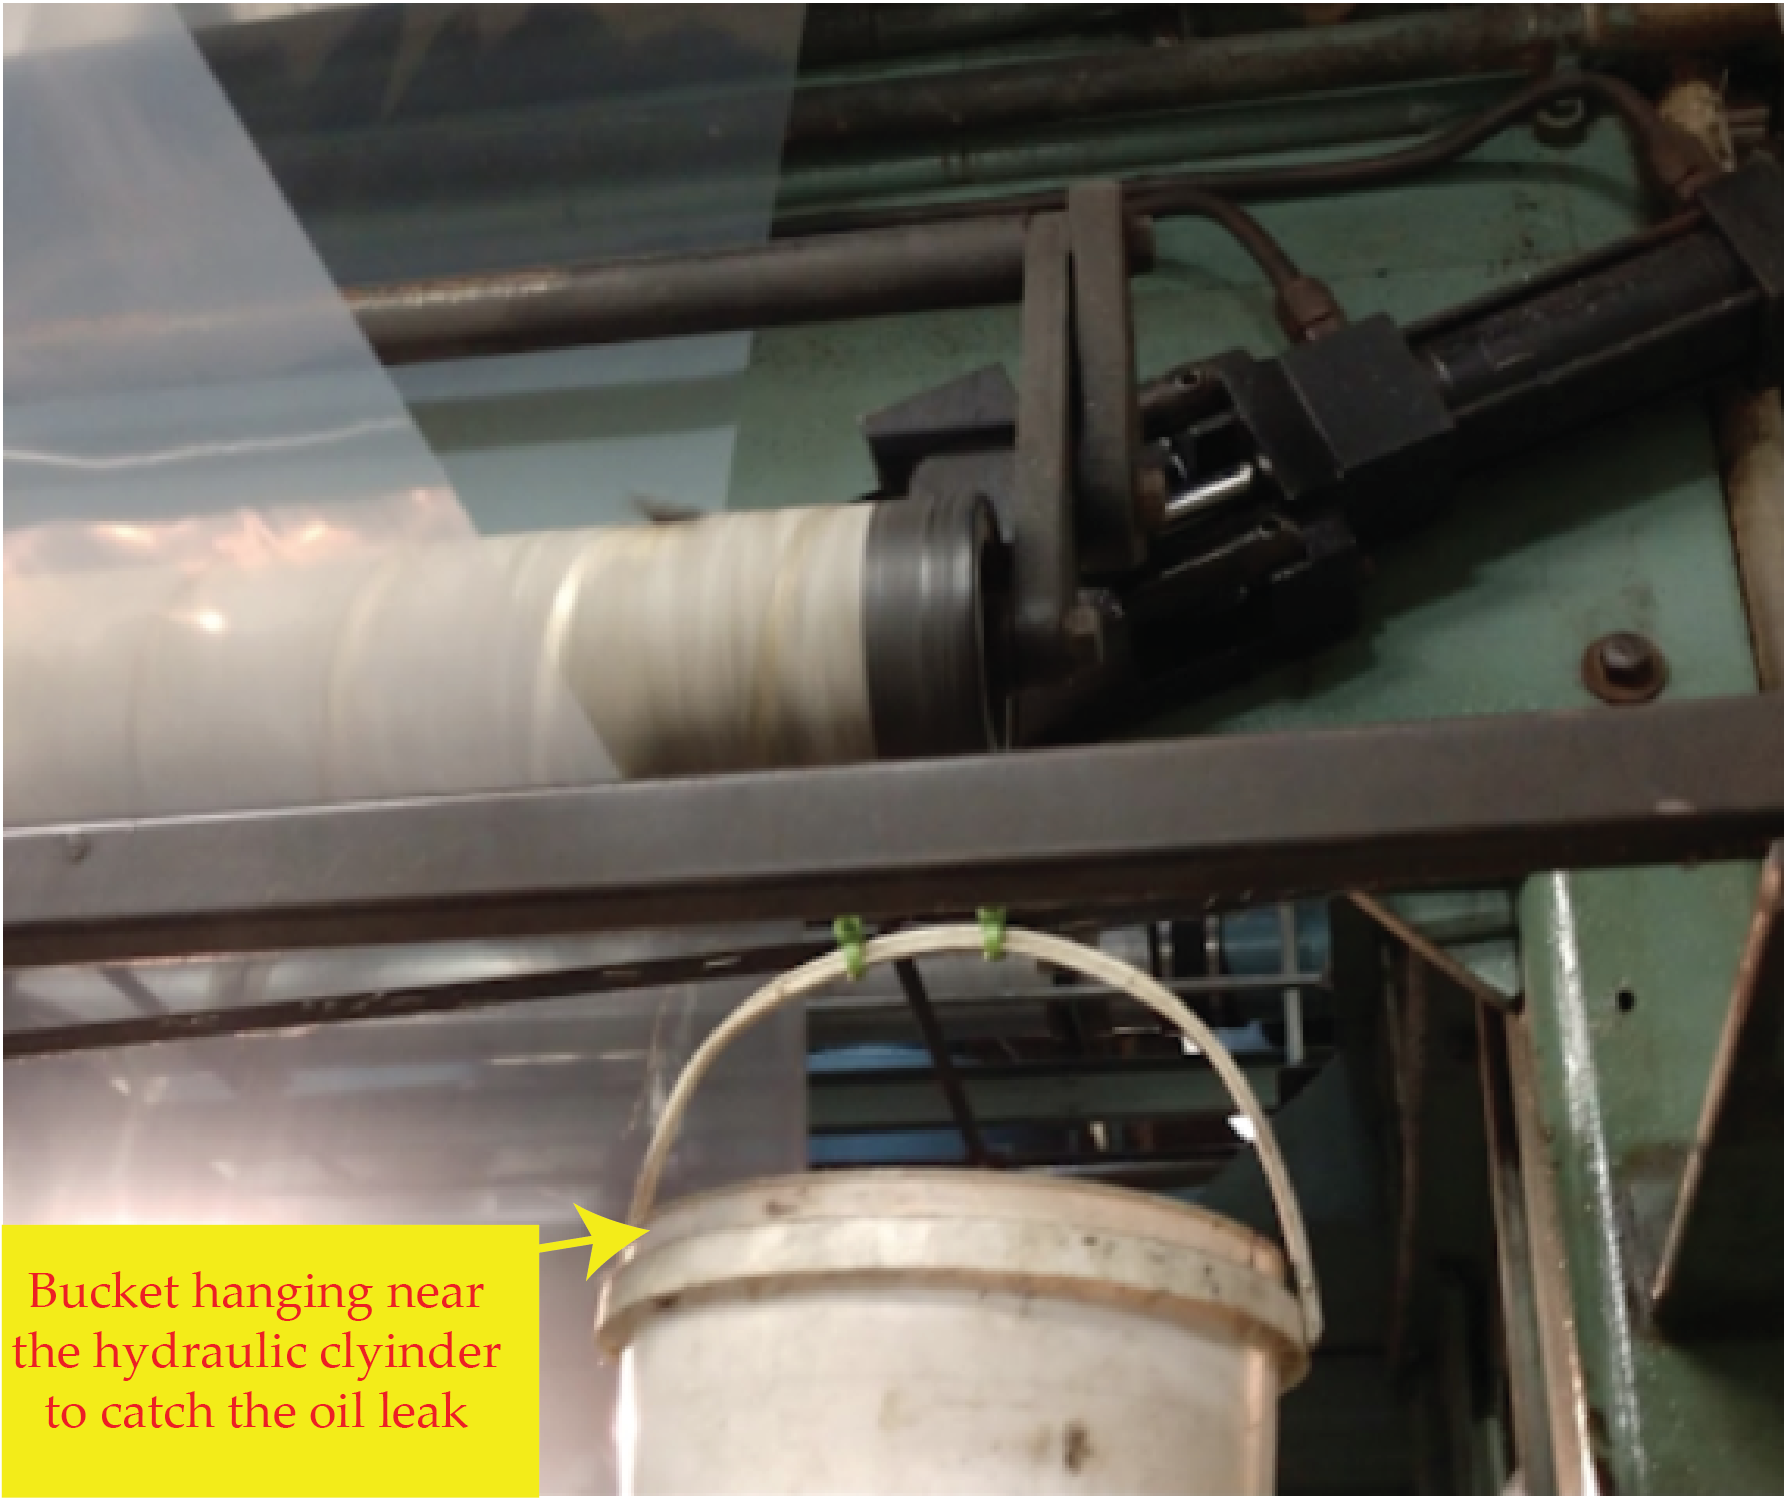 Catching a hydraulic leak from a cylinder to protect the product in the converting line